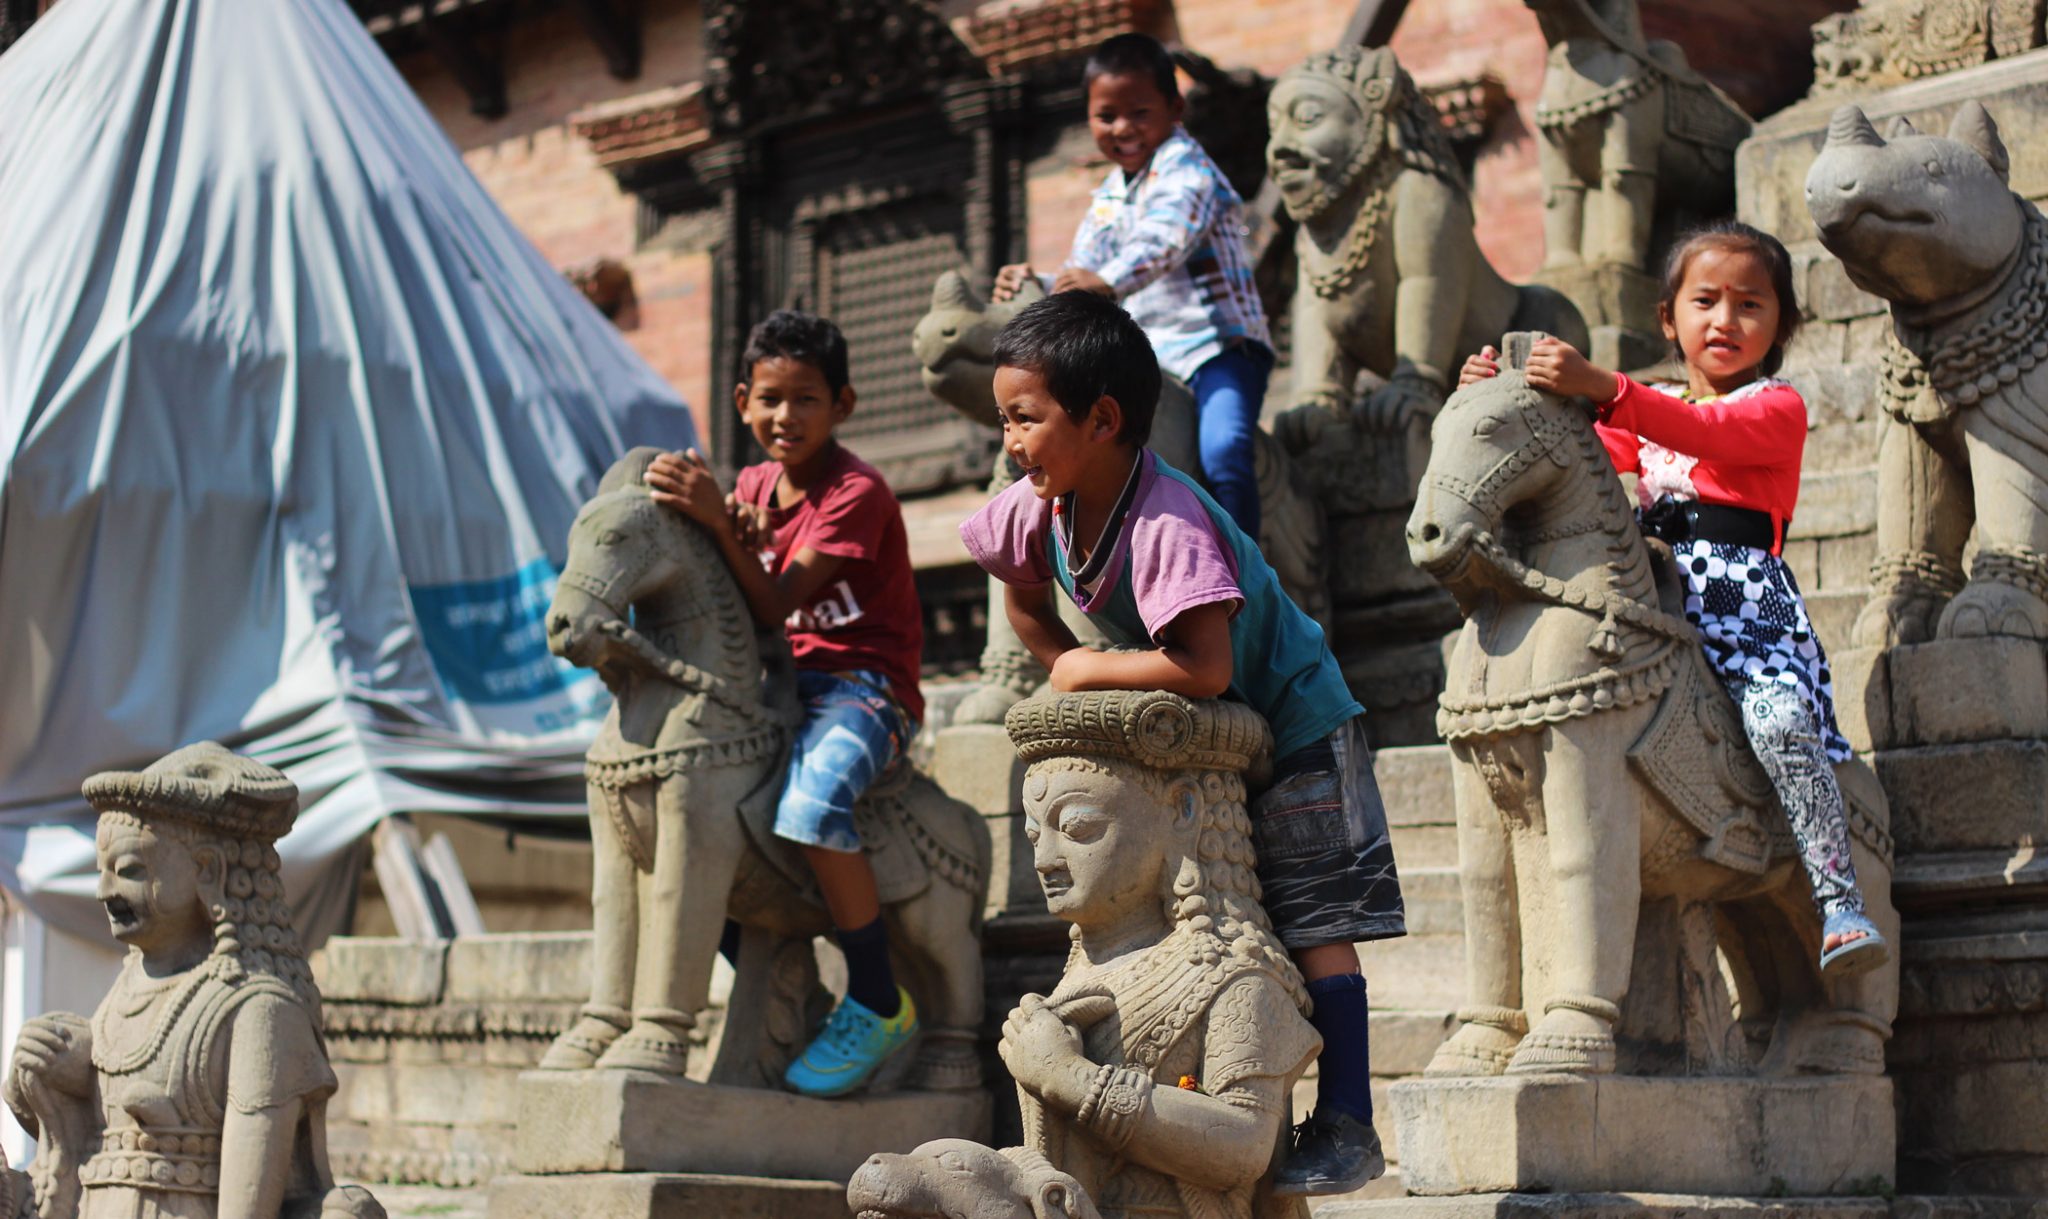 Children play on the stone animals guarding the entrance to the Siddhi Laxmi temple, a 17th-century temple which escaped relatively unscathed from the earthquake.